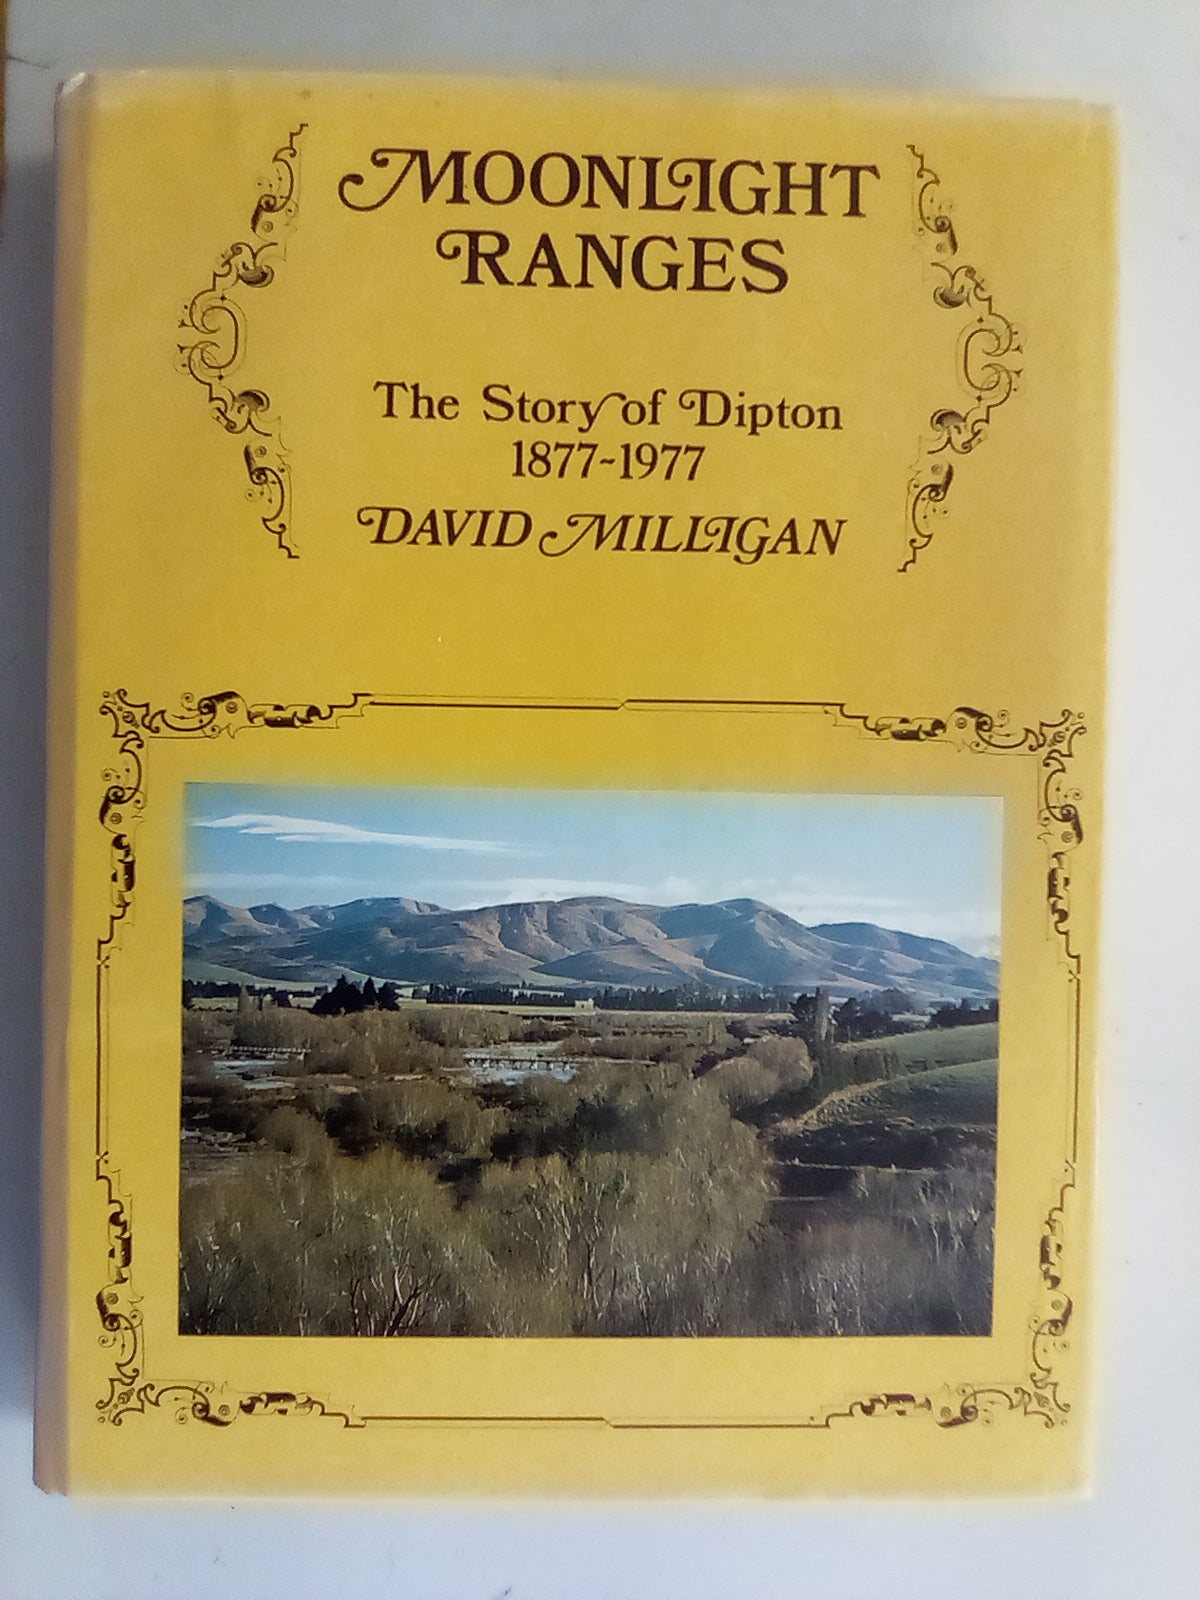 Moonlight Ranges - The Story of Dipton 1877-1977 (Signed Copy)